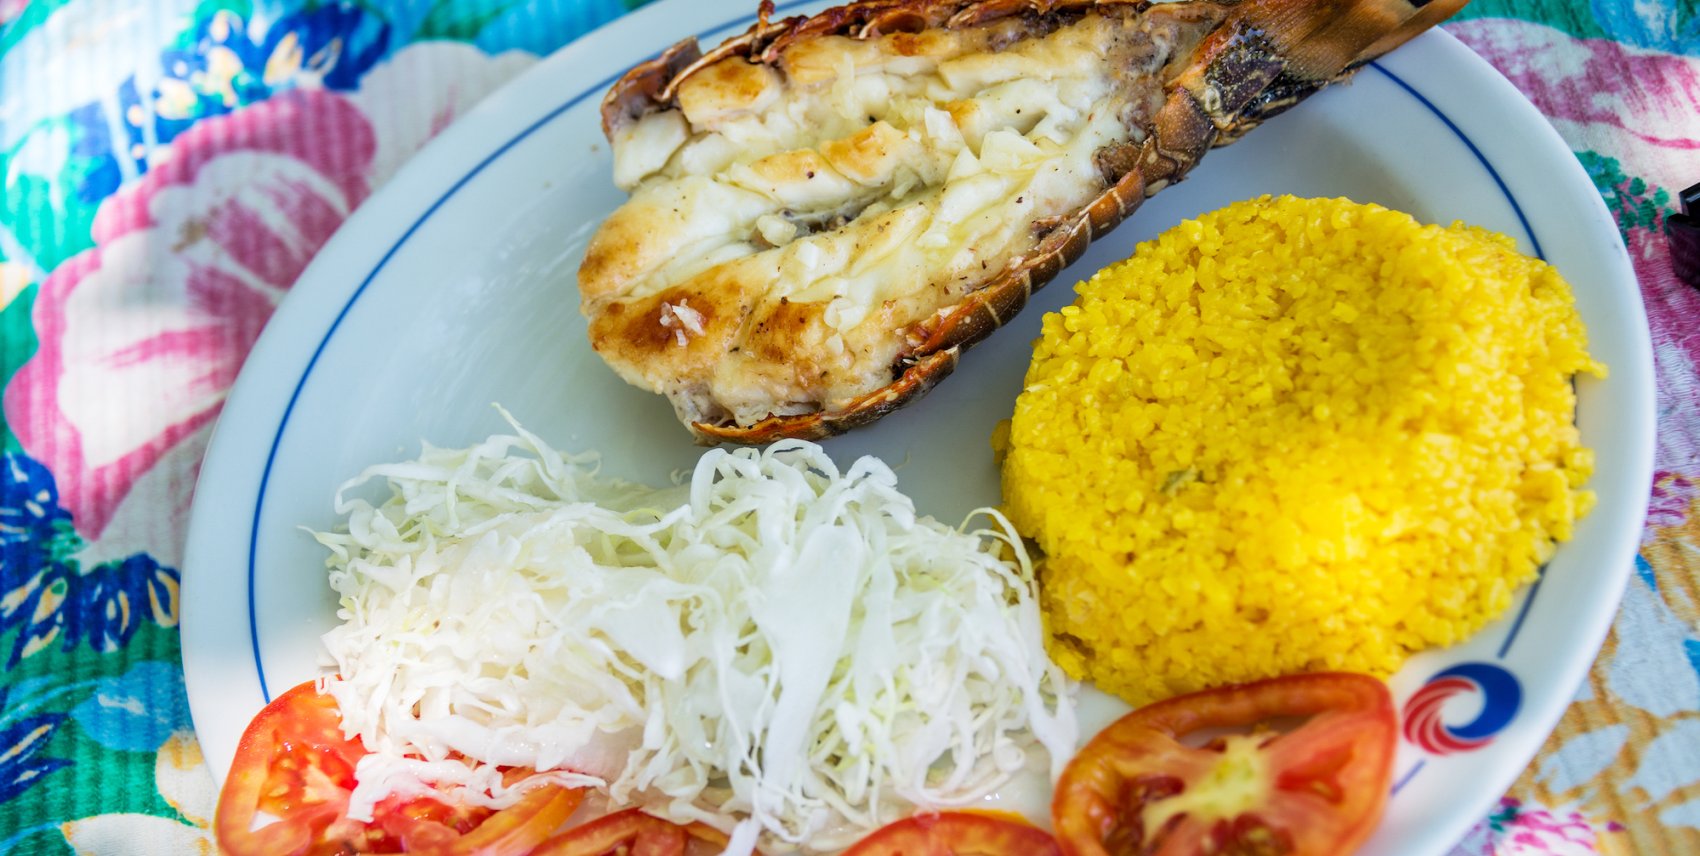 Fish, rice, noodles, and slices of tomato on a white plat atop a colorful table cloth in Cuba